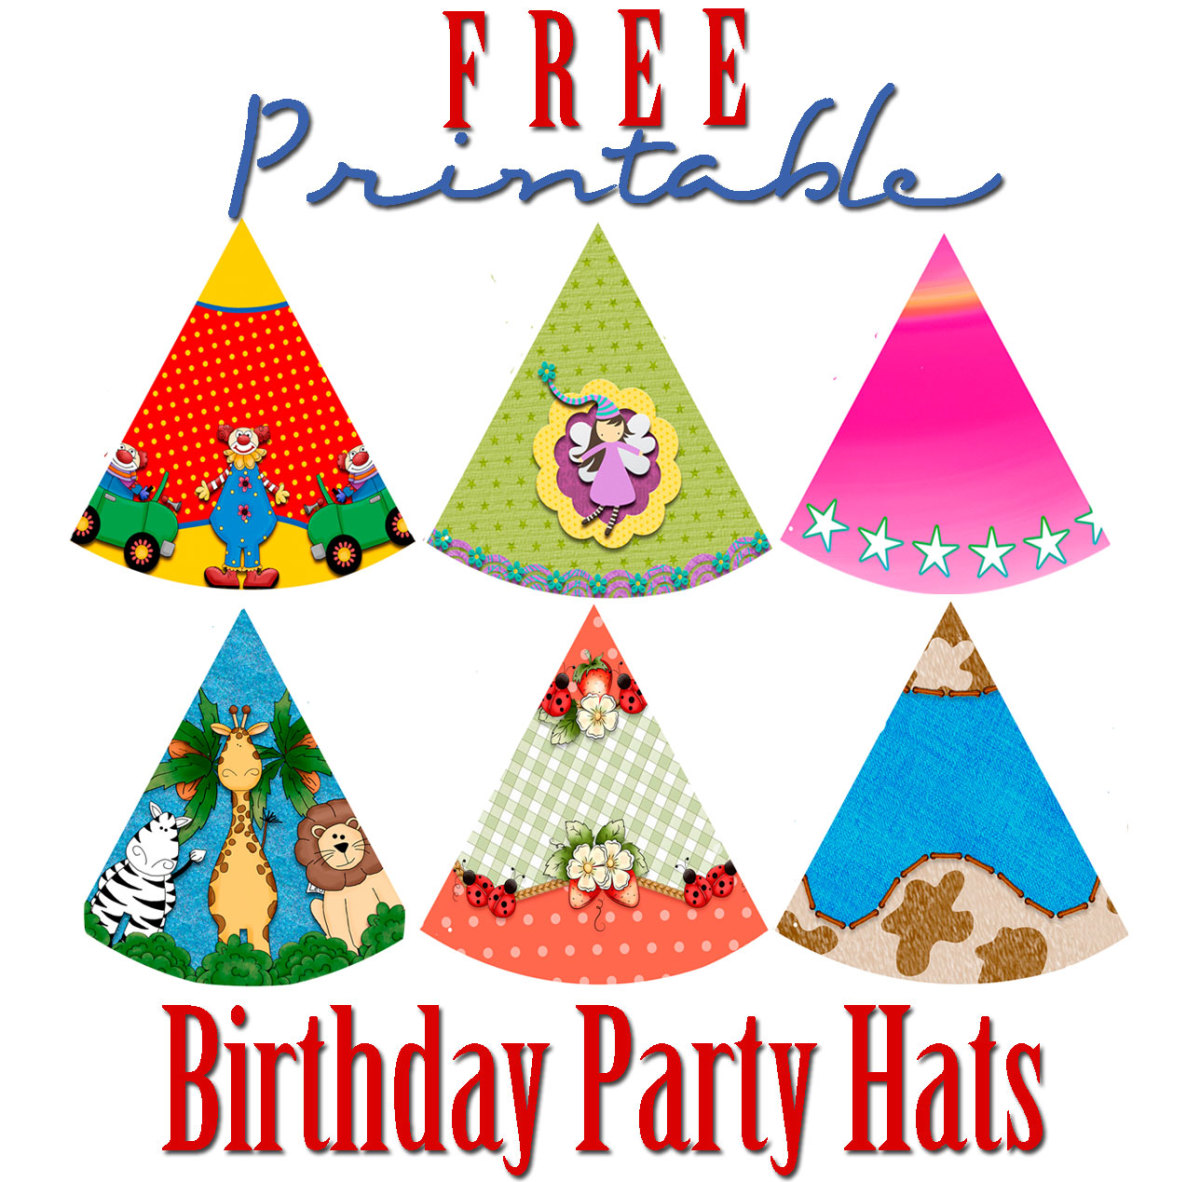 free-printable-birthday-party-hats-hubpages